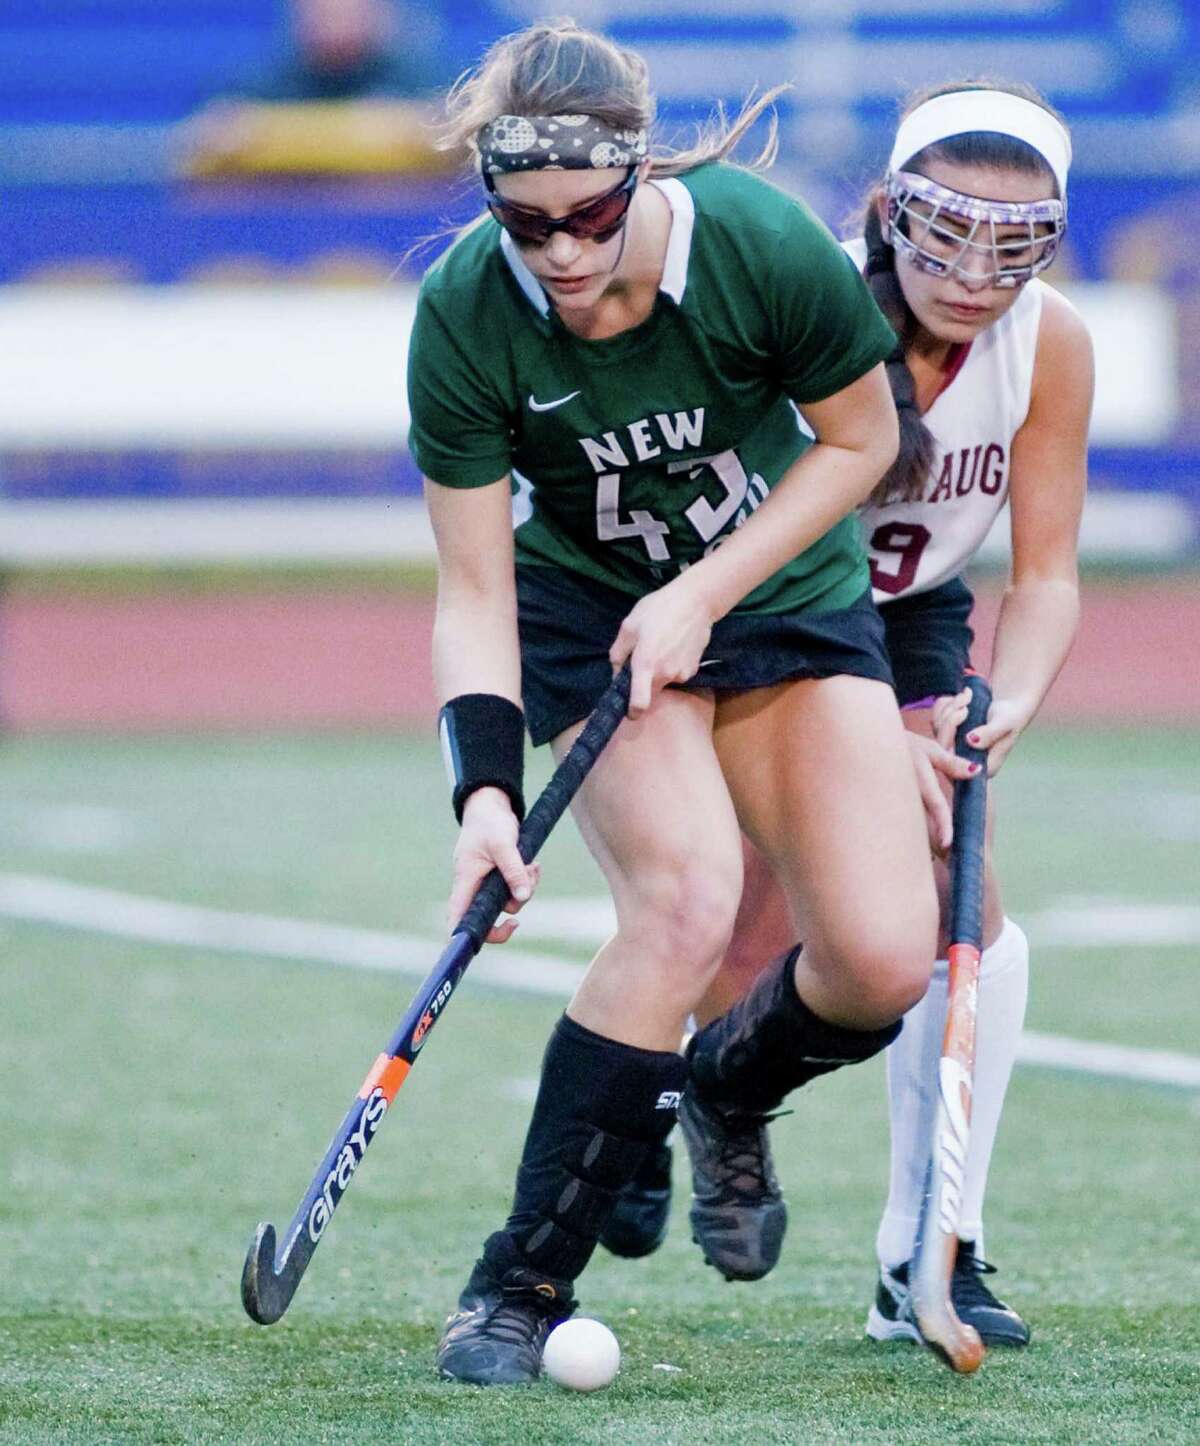 Natalie Capriglione of New Milford High School blocks out Joanna Rizza of Pomperaug High School during the SWC field hockey championship at Brookfield High School. Friday, Oct. 31, 2014